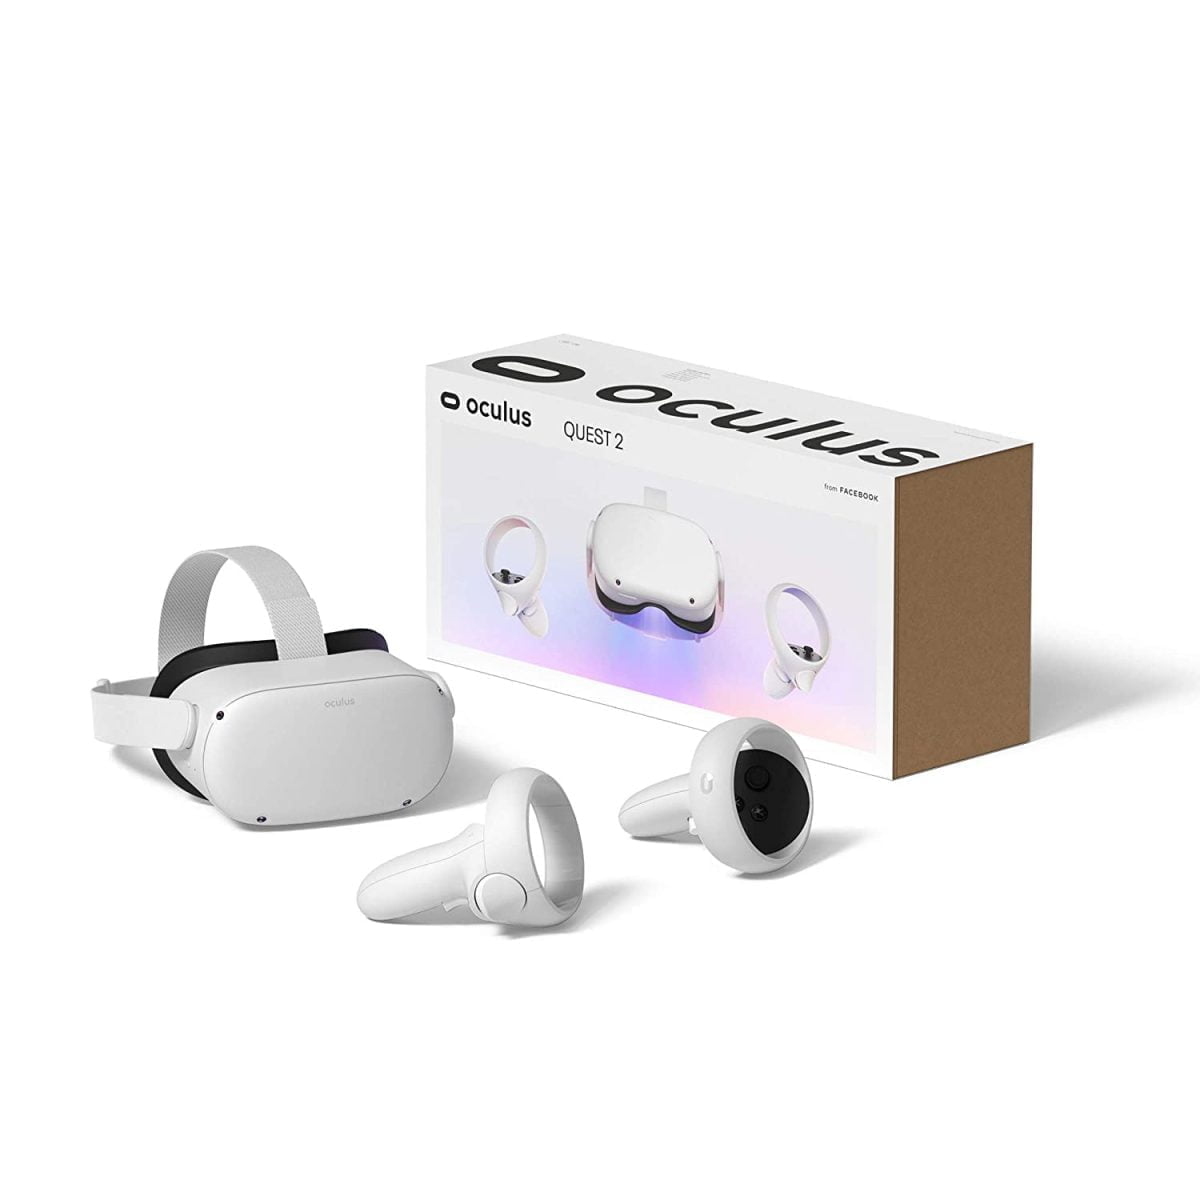 614Rzogtxl. Sl1500 Oculus Https://Youtu.be/Atvgl9Wojsm Oculus Quest 2 Oculus Quest 2 256 Gb With Oculus Link Cable 5M Plus Advanced All-In-One Virtual Reality Headset (Combo Offer)